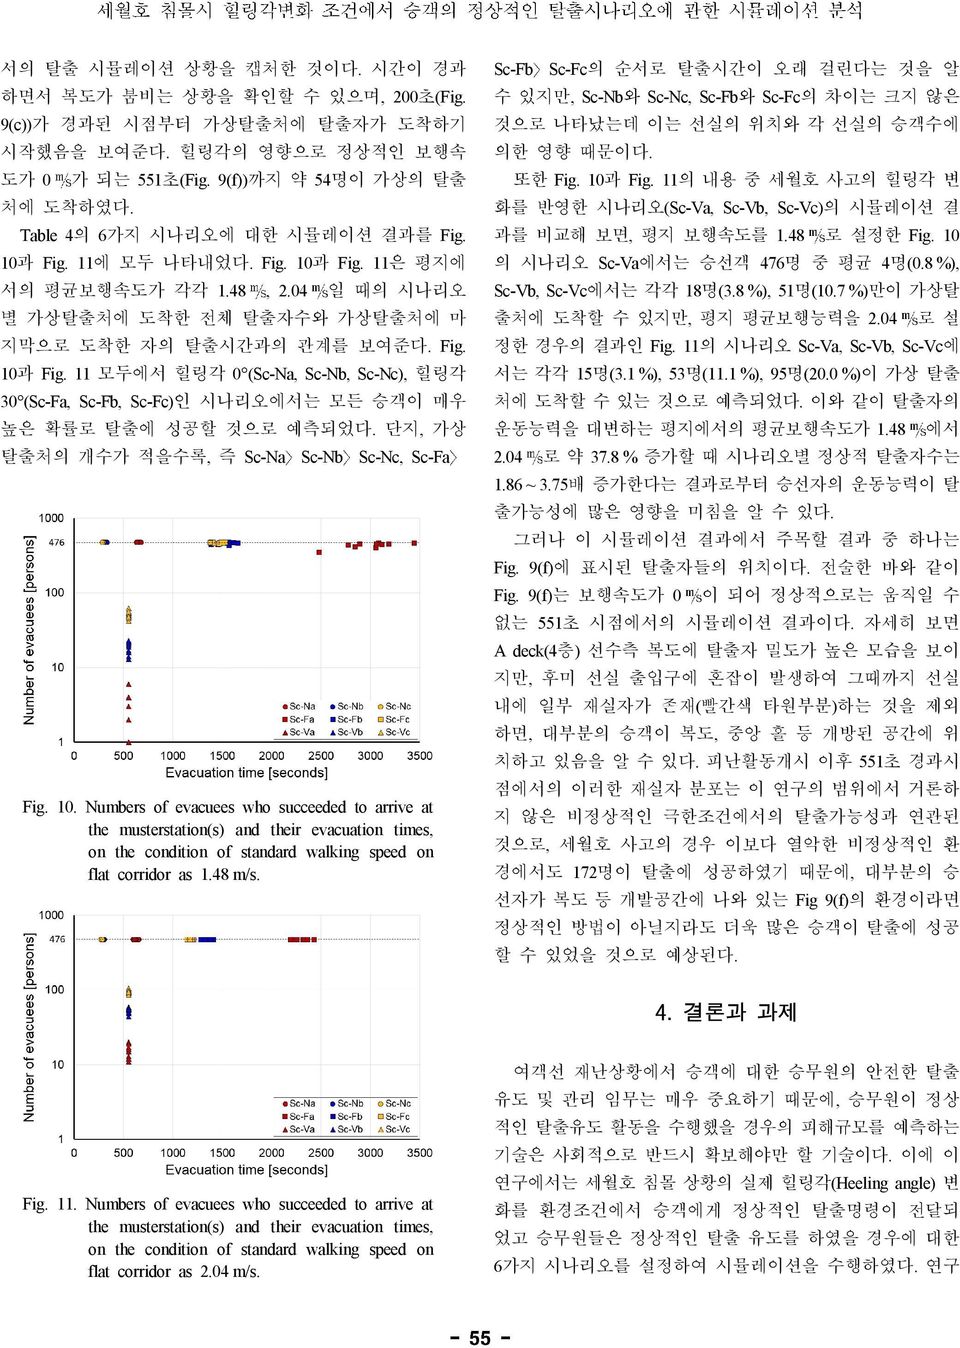 Fig. 10과 Fig. 11 모두에서 힐링각 0 (Sc-Na, Sc-Nb, Sc-Nc), 힐링각 30 (Sc-Fa, Sc-Fb, Sc-Fc)인 시나리오에서는 모든 승객이 매우 높은 확률로 탈출에 성공할 것으로 예측되었다. 단지, 가상 탈출처의 개수가 적을수록, 즉 Sc-Na Sc-Nb Sc-Nc, Sc-Fa Fig. 10. Numbers of evacuees who succeeded to arrive at the musterstation(s) and their evacuation times, on the condition of standard walking speed on flat corridor as 1.